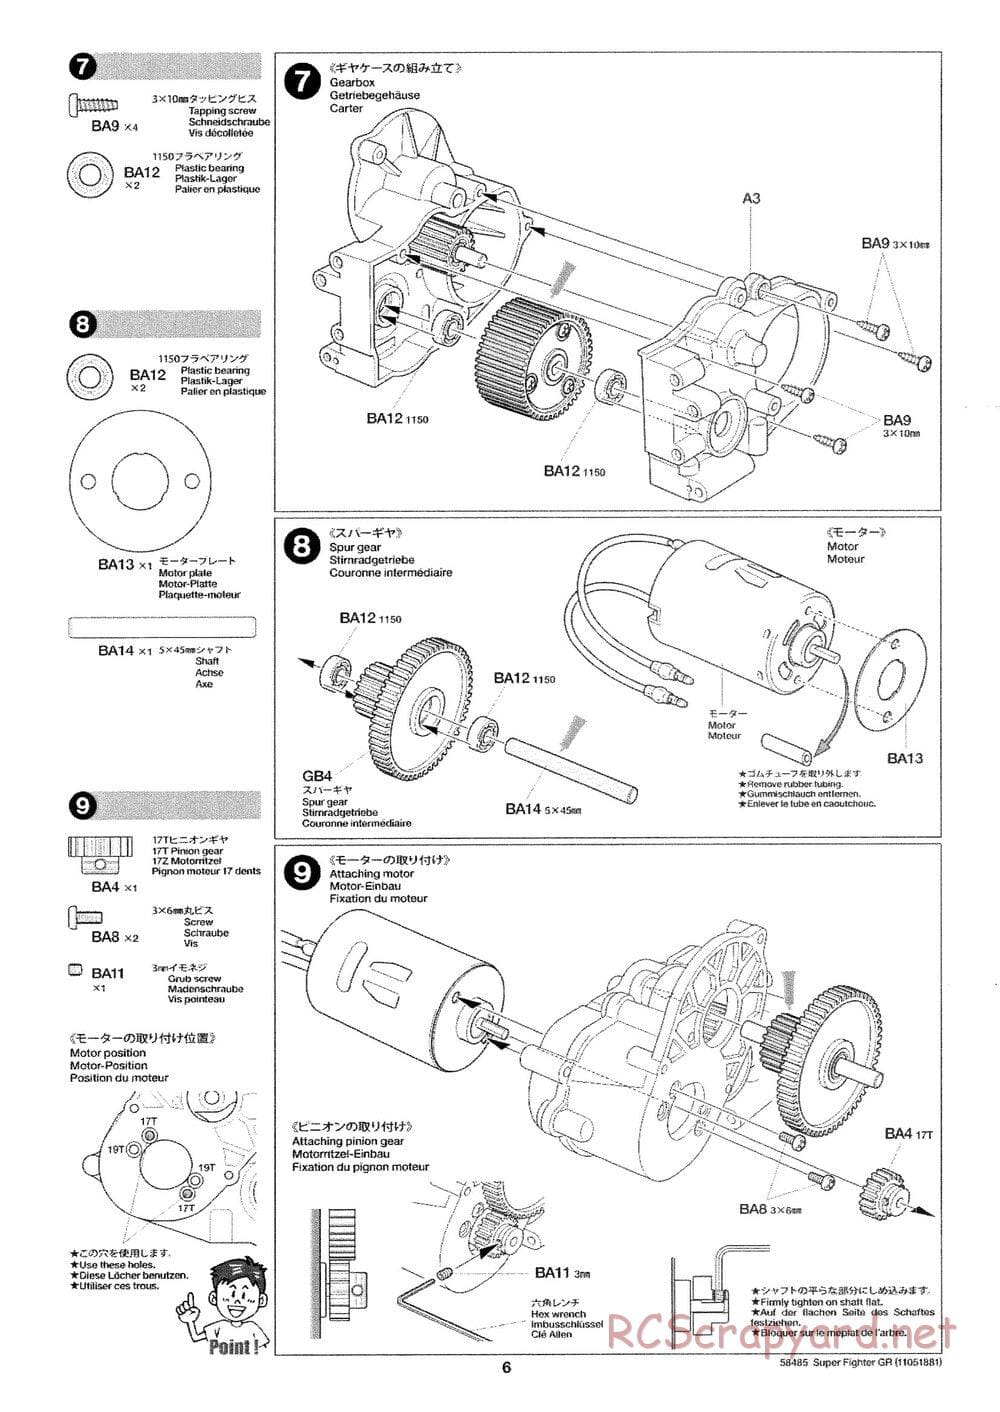 Tamiya - Super Fighter GR - DT-02 Chassis - Manual - Page 6